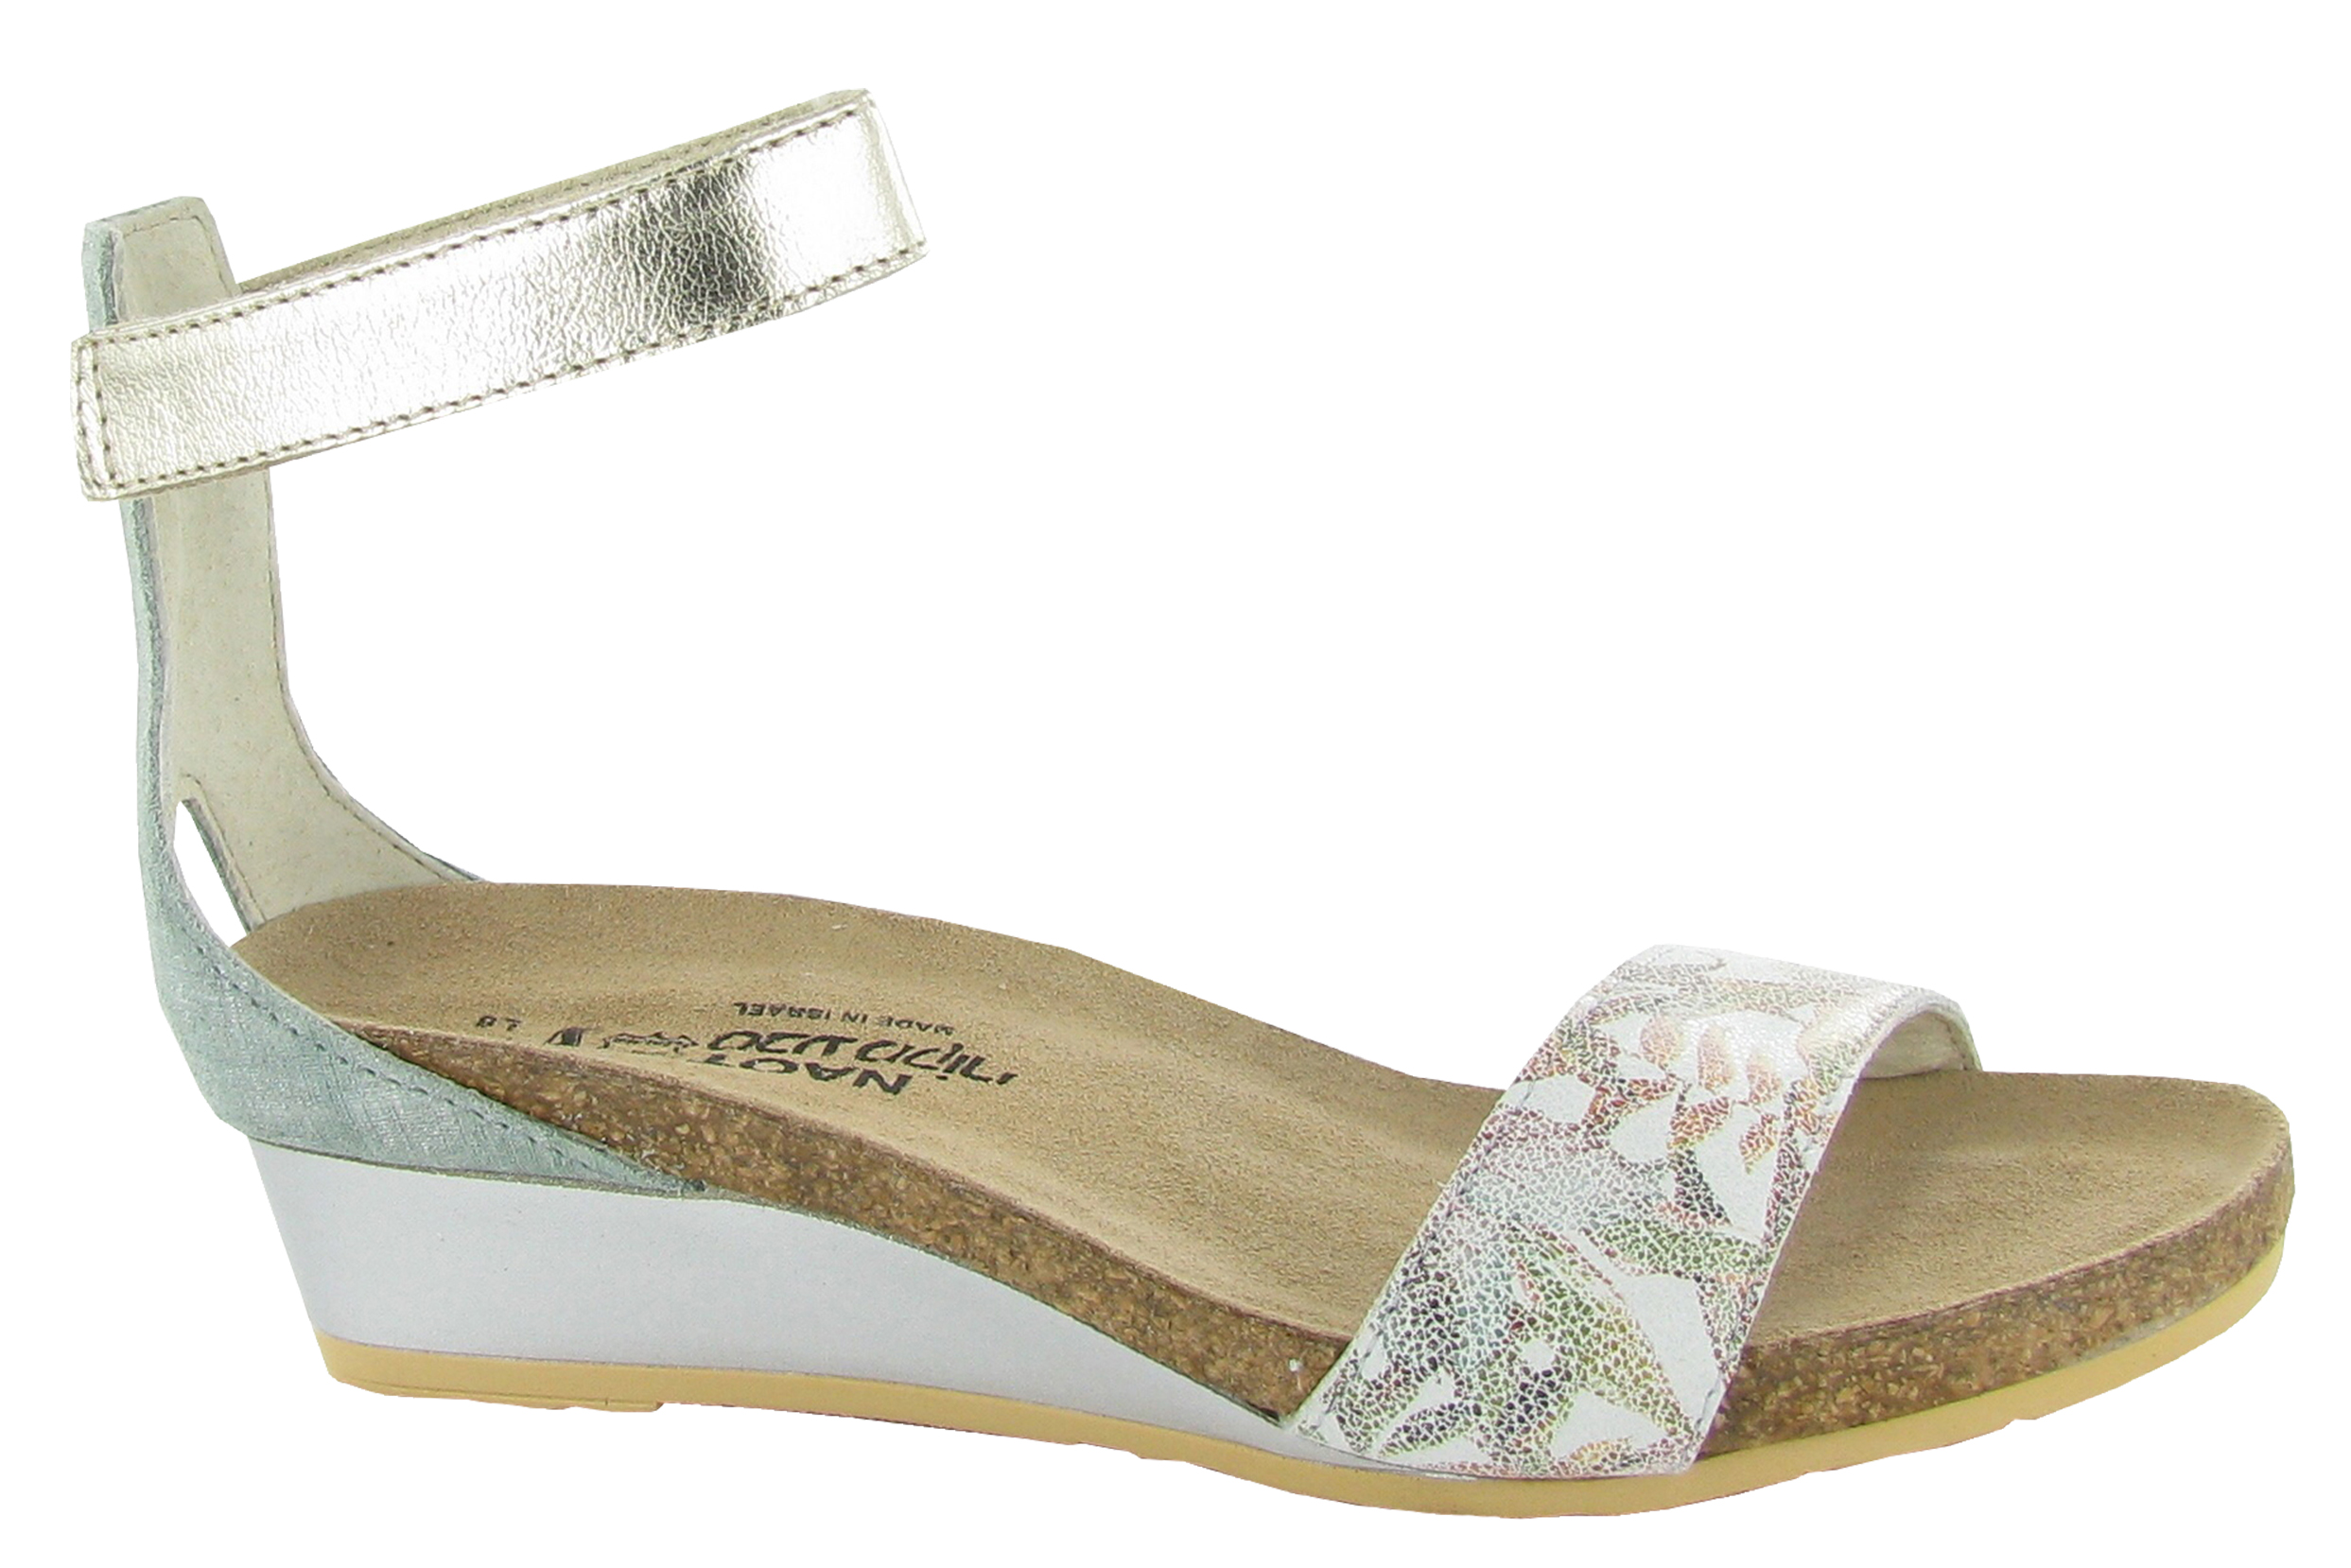 Naot Pixie Pearl Rose/Champagne/Silver Wedge Sandal Women's sizes 5-11/36-42 NEW 